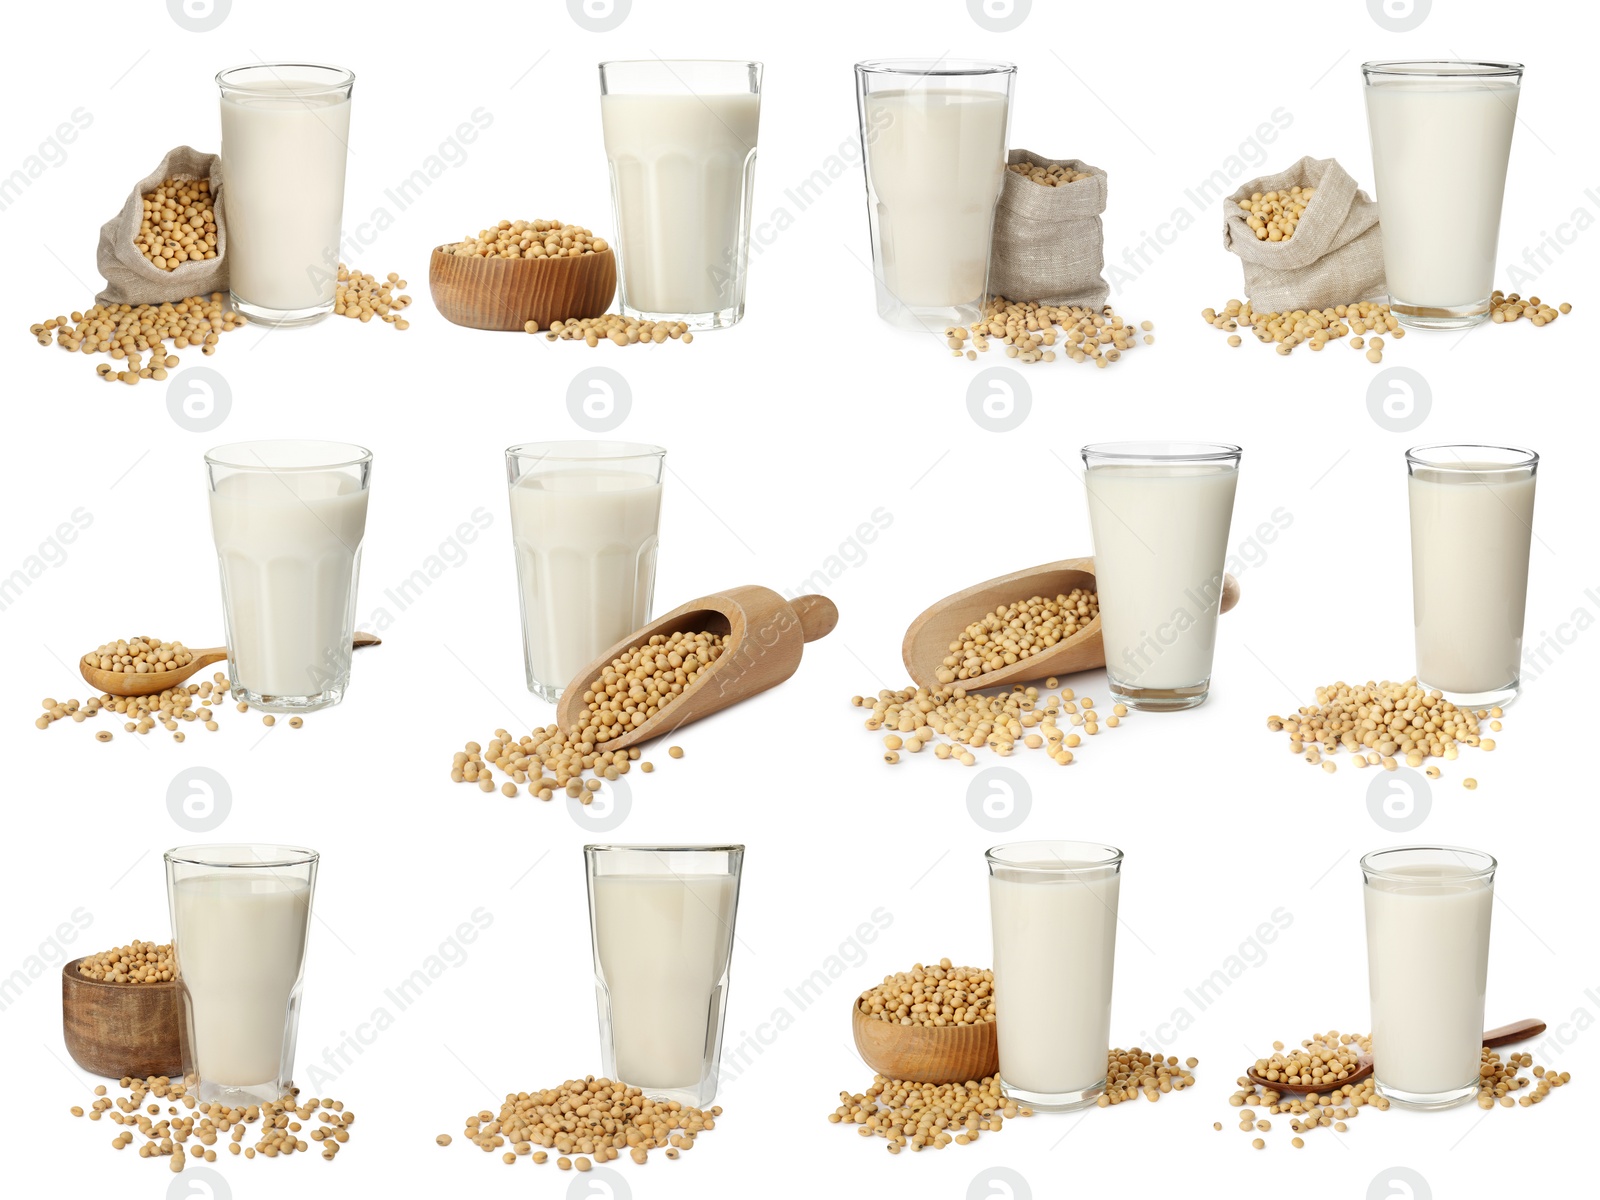 Image of Set with natural soy milk and beans on white background